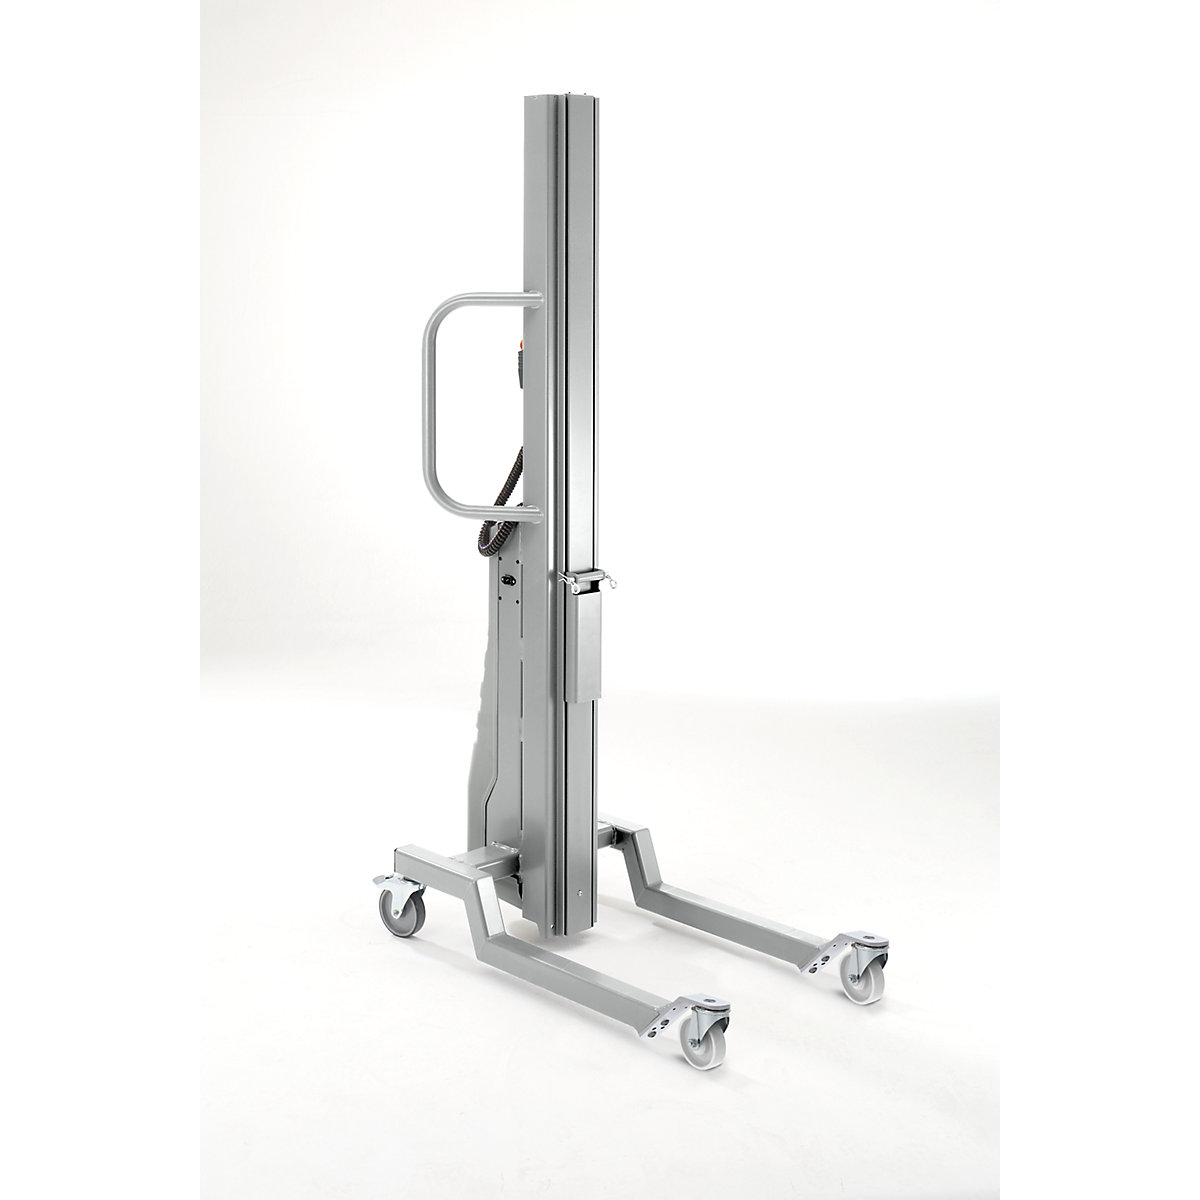 Multi-lifter, in stainless steel, max. load 150 kg, with 4 steering wheels